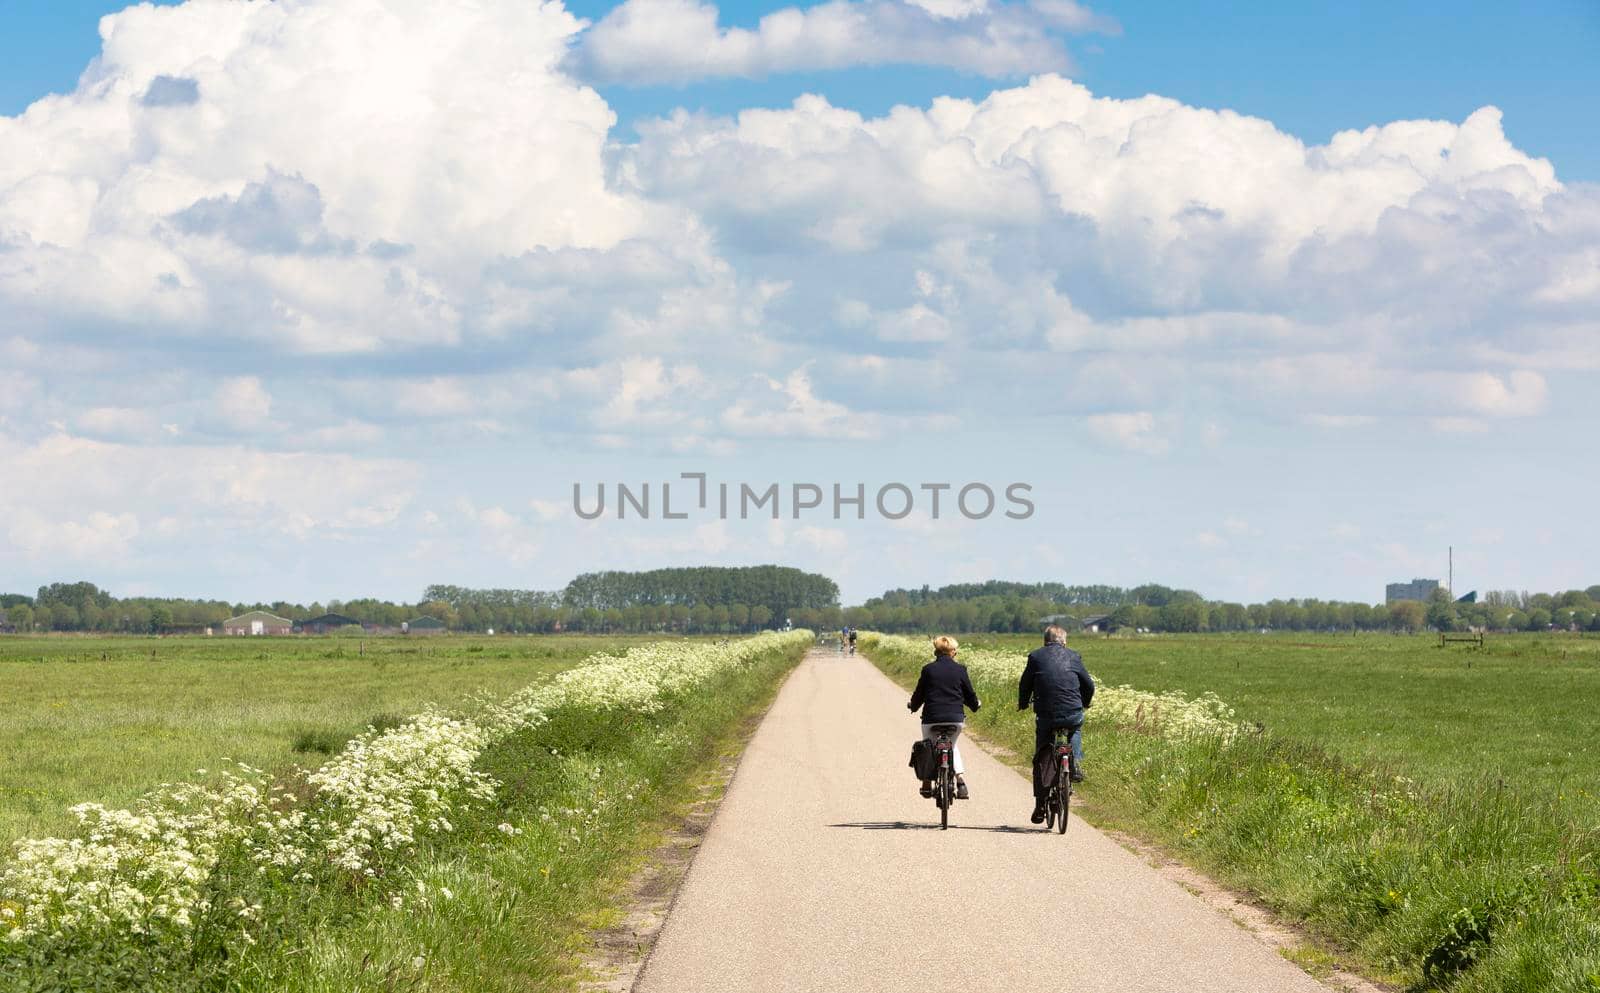 couple on bicycle passes white summer flowers on country road near meadows in the netherlands under blue summer sky with white clouds